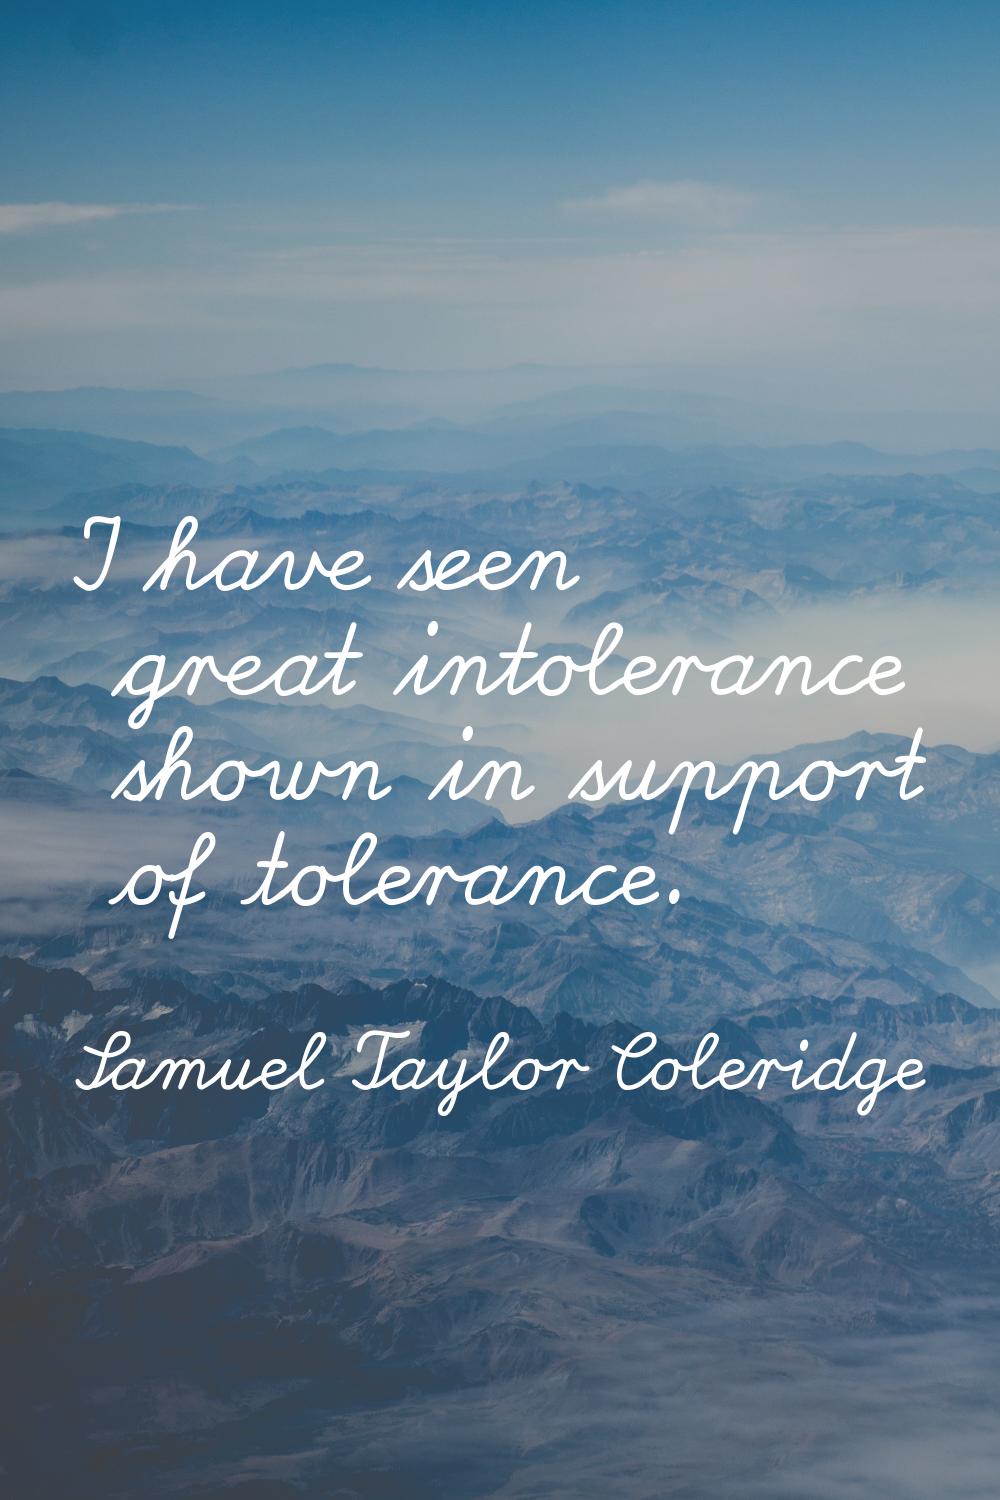 I have seen great intolerance shown in support of tolerance.